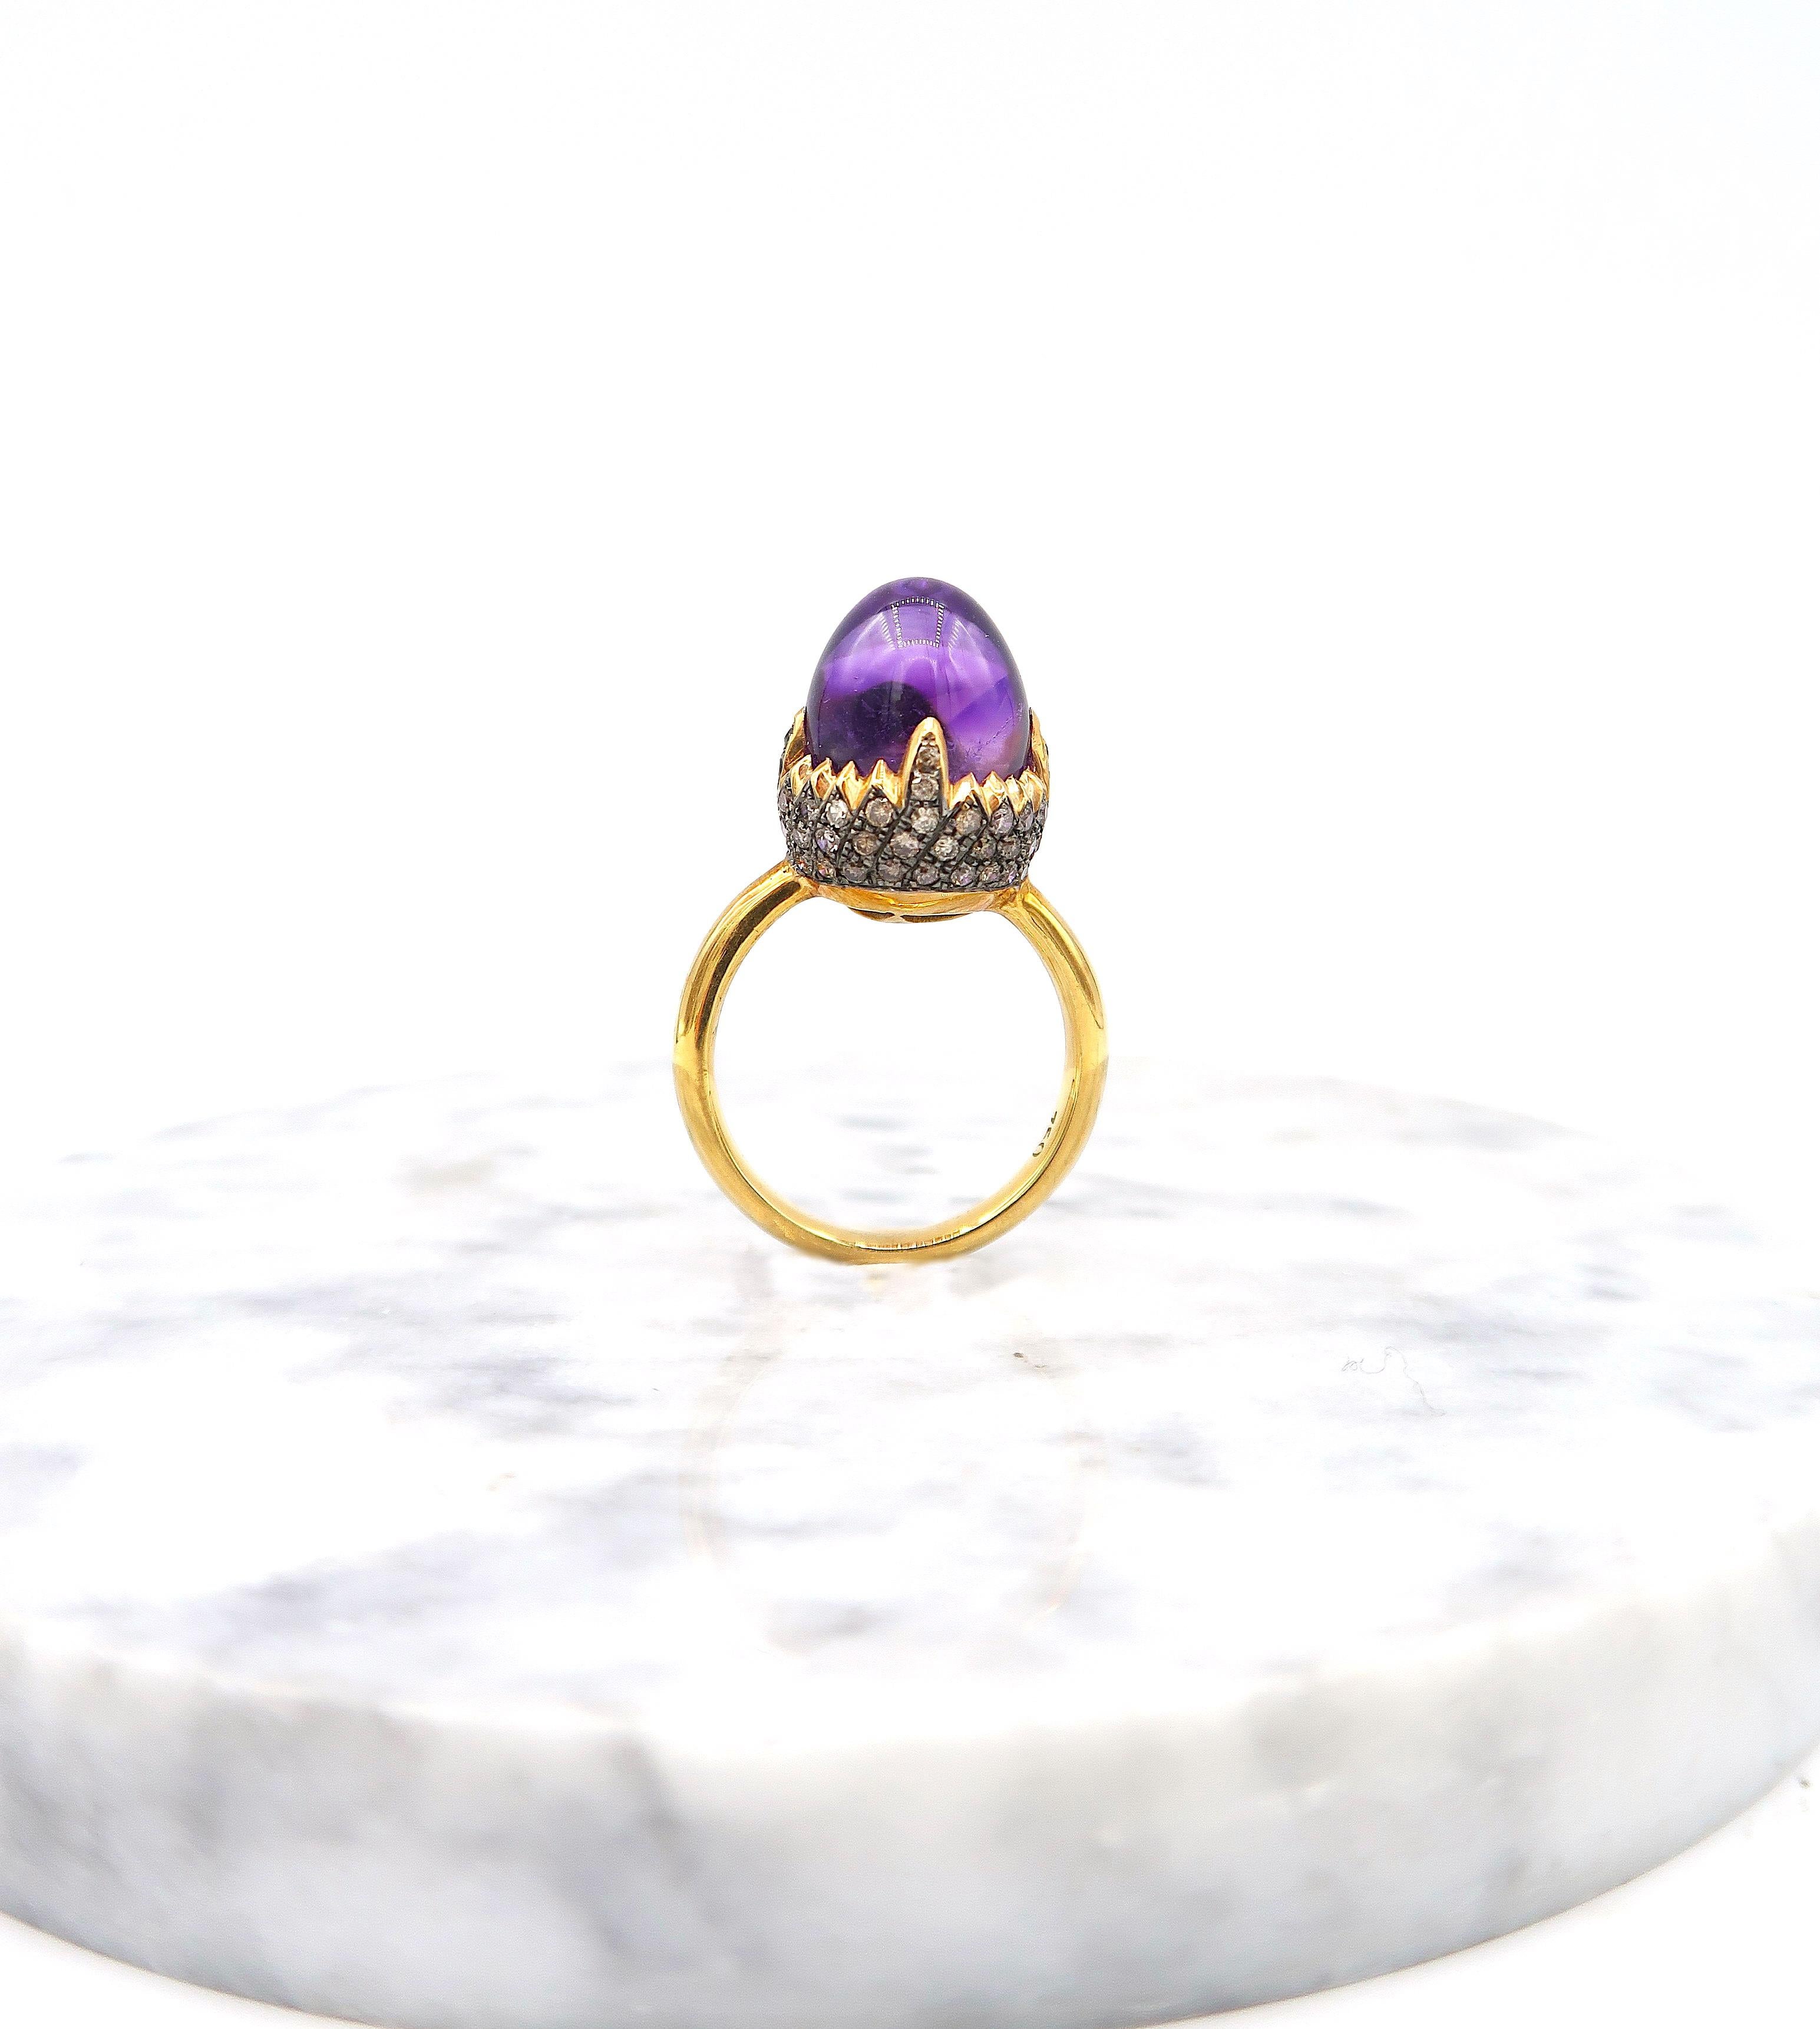 Acorn-Shaped Amethyst with Pavé Champagne/ Brown Diamond Cupule Ring in 18K Gold

Gold: 18K Gold 7.20g.
Champagne Diamond: 1.14ct.
Amethyst: 9.31cts.

Ring size: US 7
Please let us know should you wish to have the ring resized.